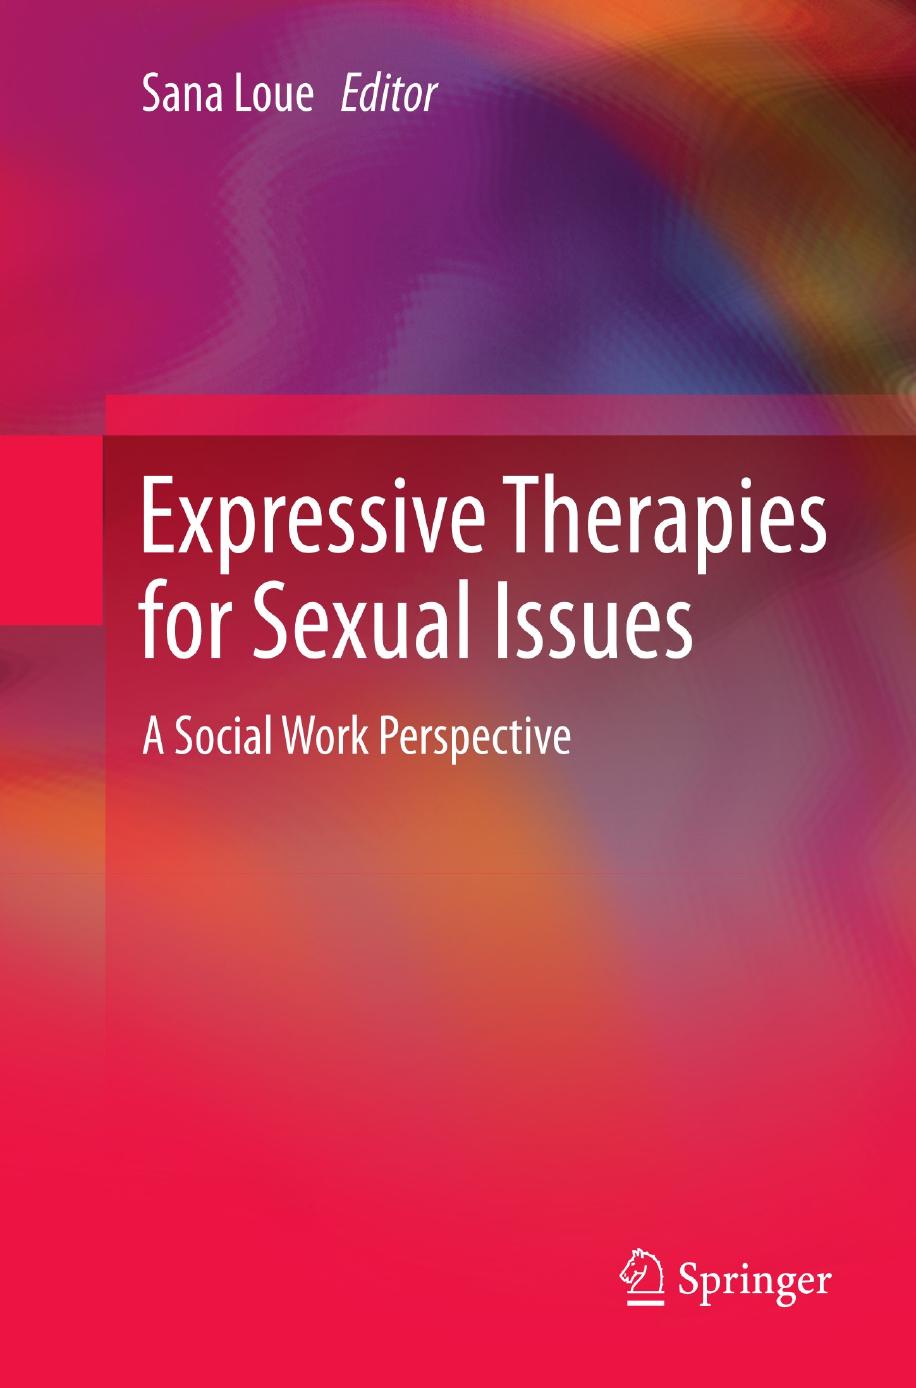 Expressive Therapies for Sexual Issues: A Social Work Perspective